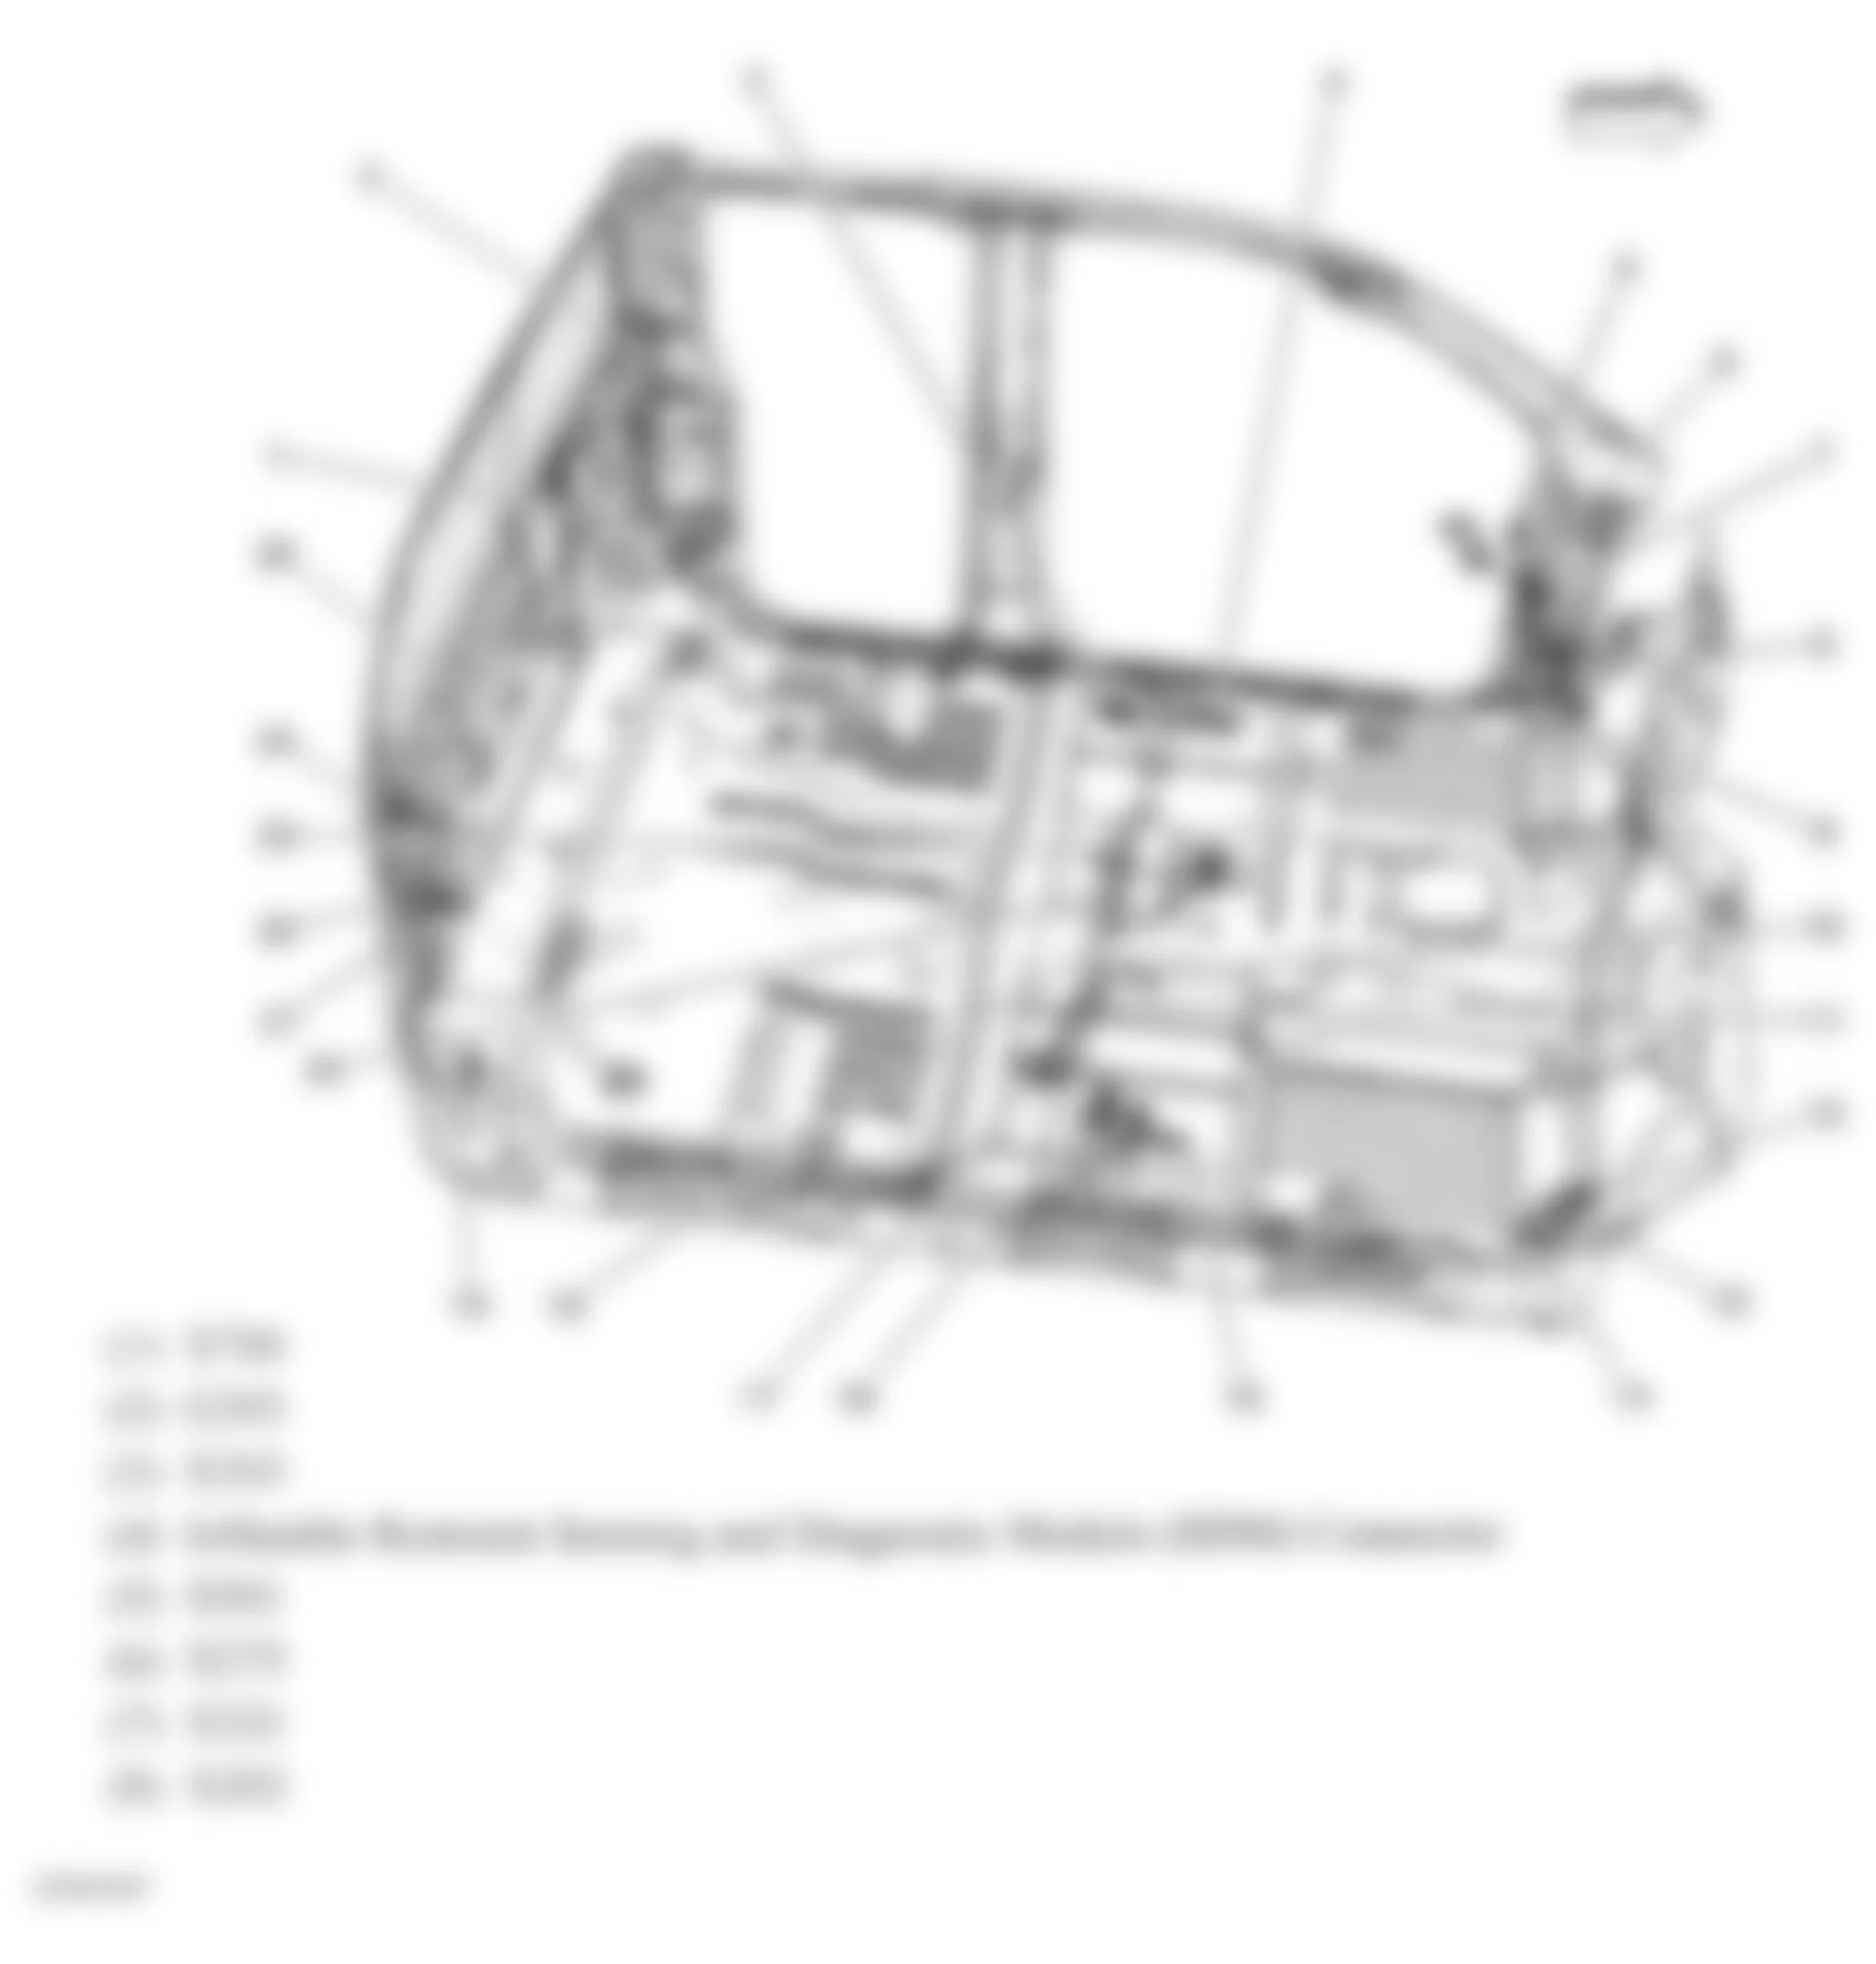 GMC Sierra 3500 HD 2008 - Component Locations -  Passenger Compartment (Extended Cab) (1 Of 2)